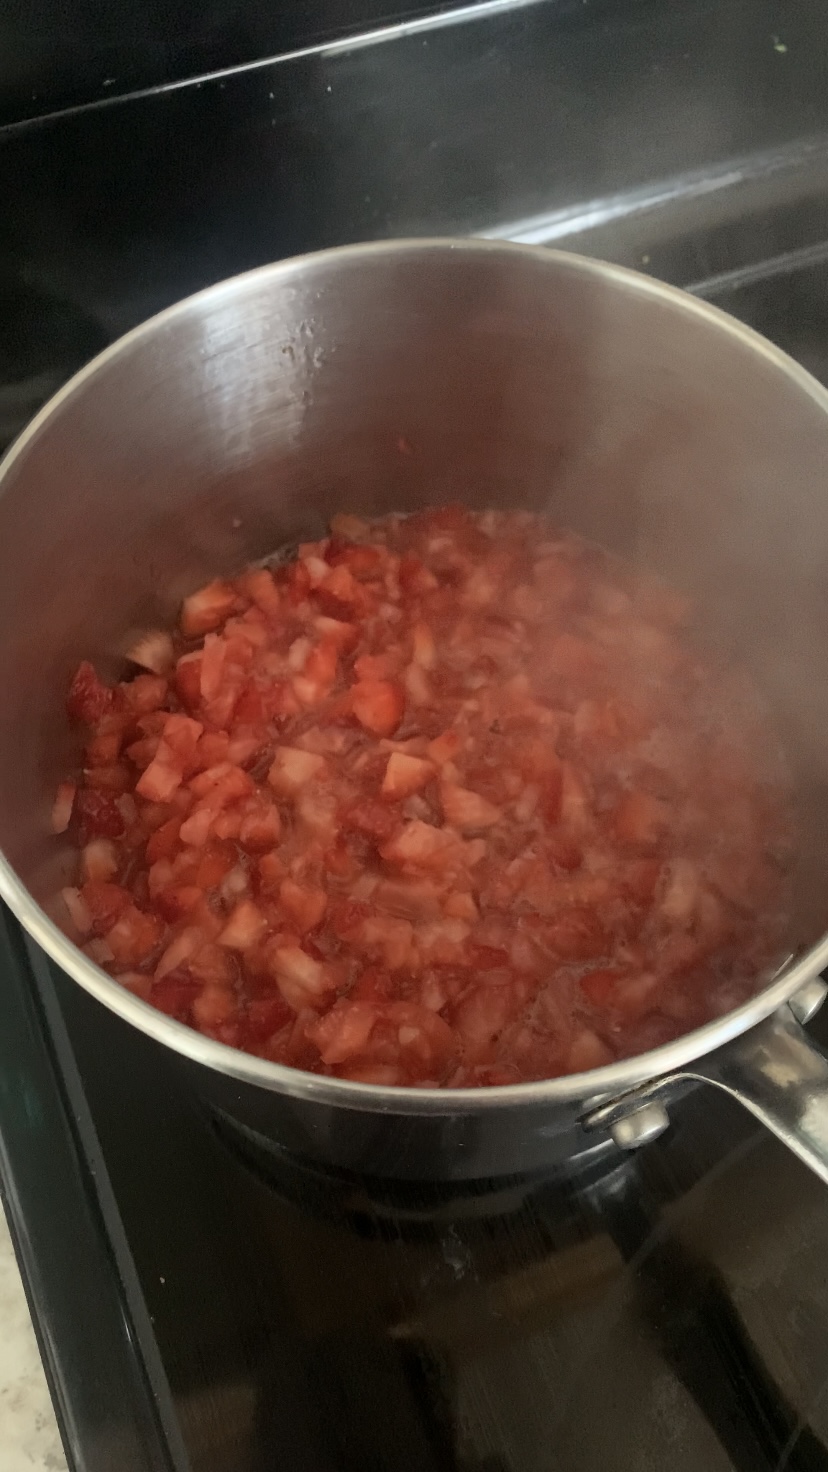 Cooking strawberry sauce.